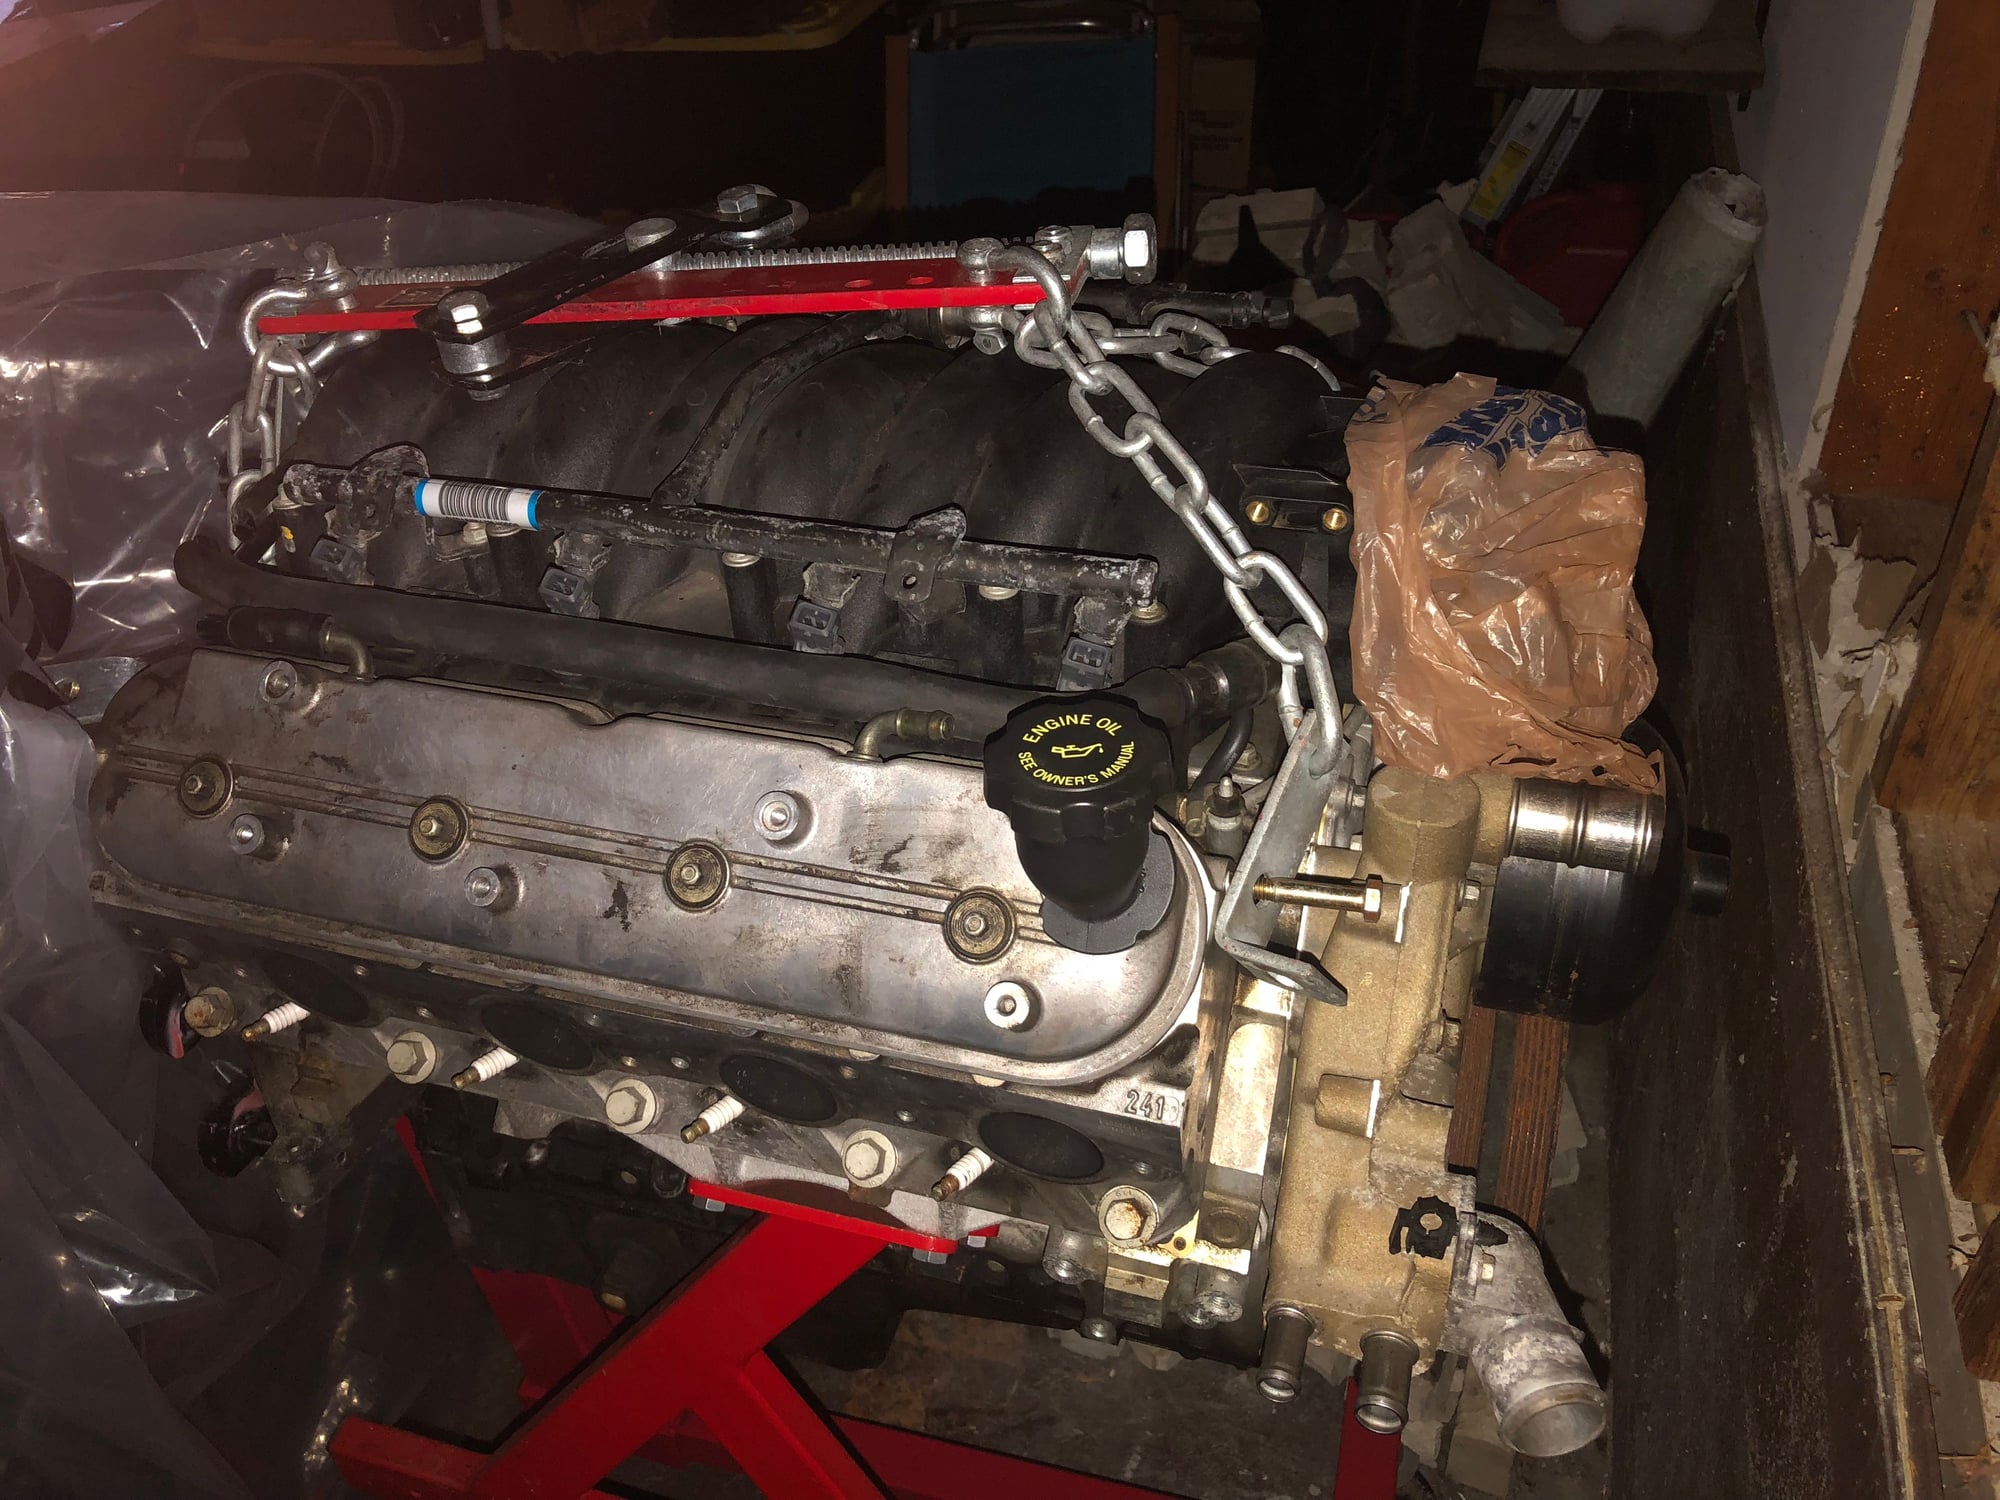  - FS 2002 WS6 Transam Motor. 408 RWHP, dyno and tune included. 60k Miles - Township Of Washington, NJ 07676, United States